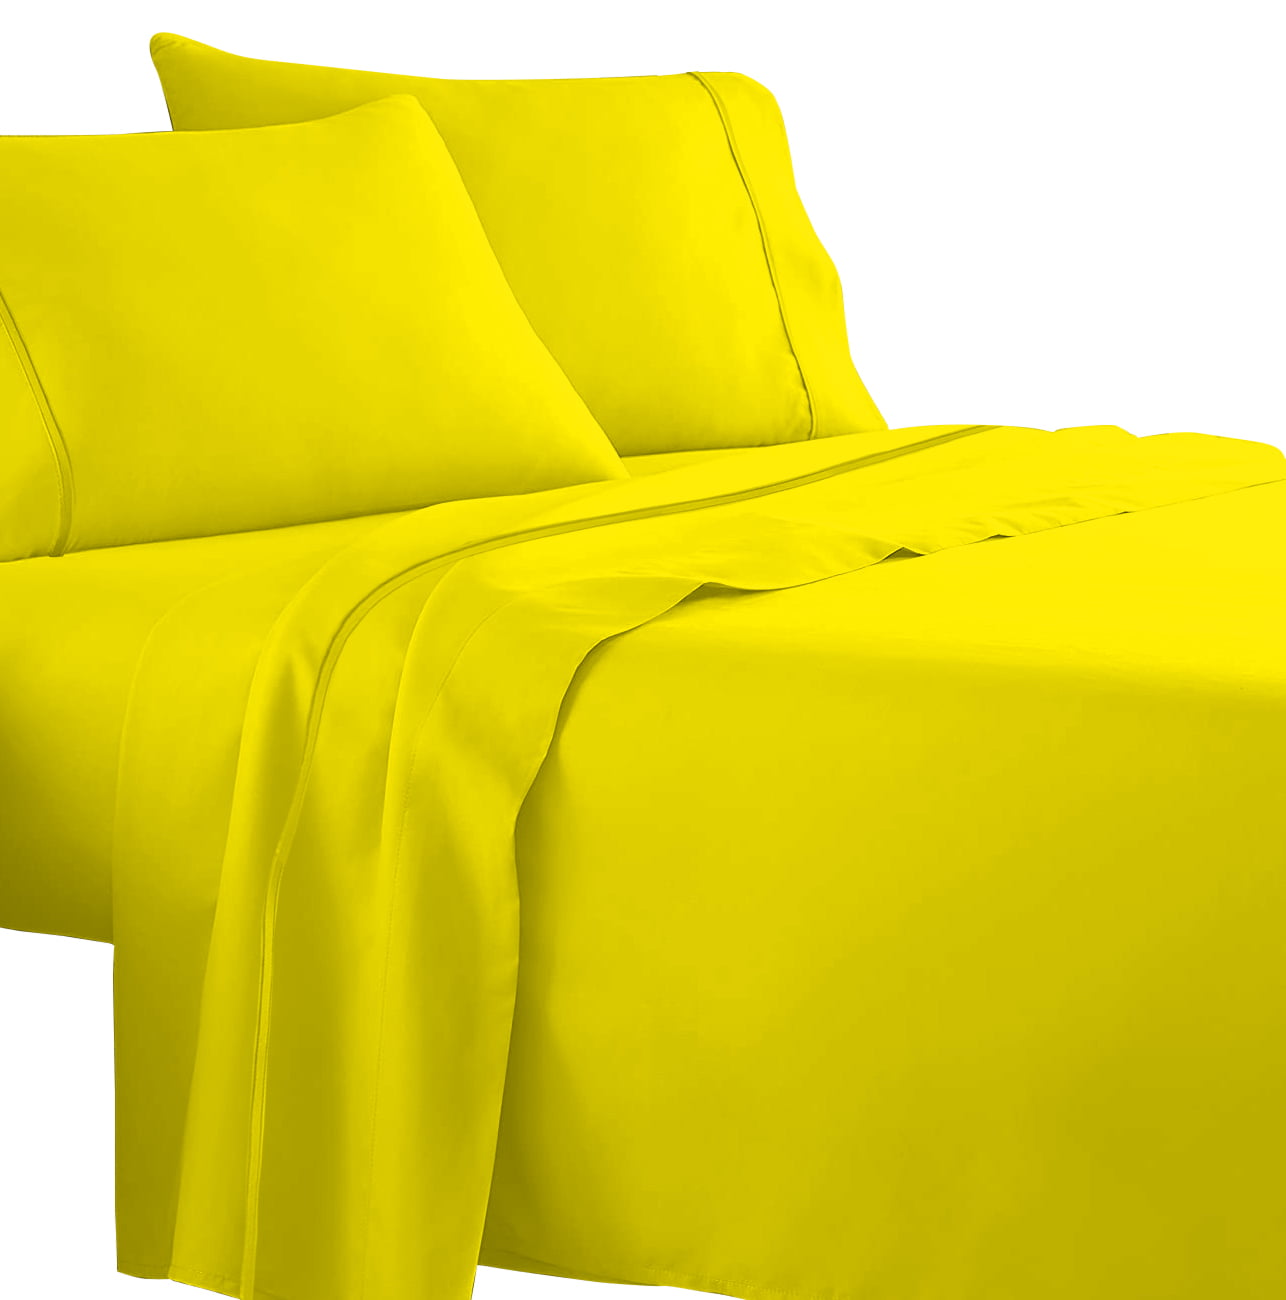 100 Egyptian Cotton 4 Pcs Sheet Set With Piping Solid 21 inches (Yellow,Twin Xl)